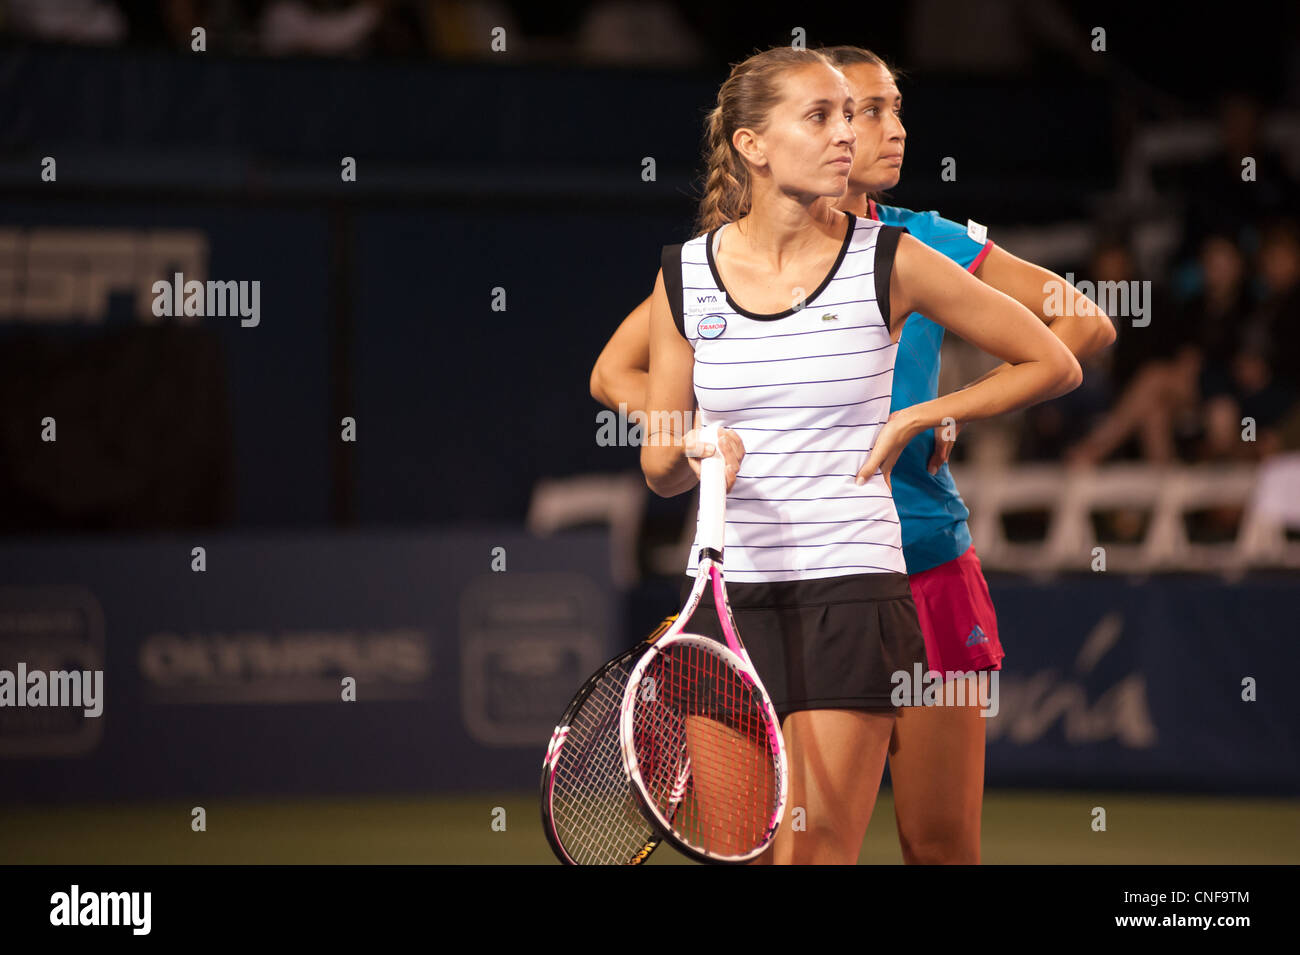 Doubles partners, Flavia Pennetta and Gisela Dulko, on tennis court at La Costa Resort in Carlsbad, California. Stock Photo